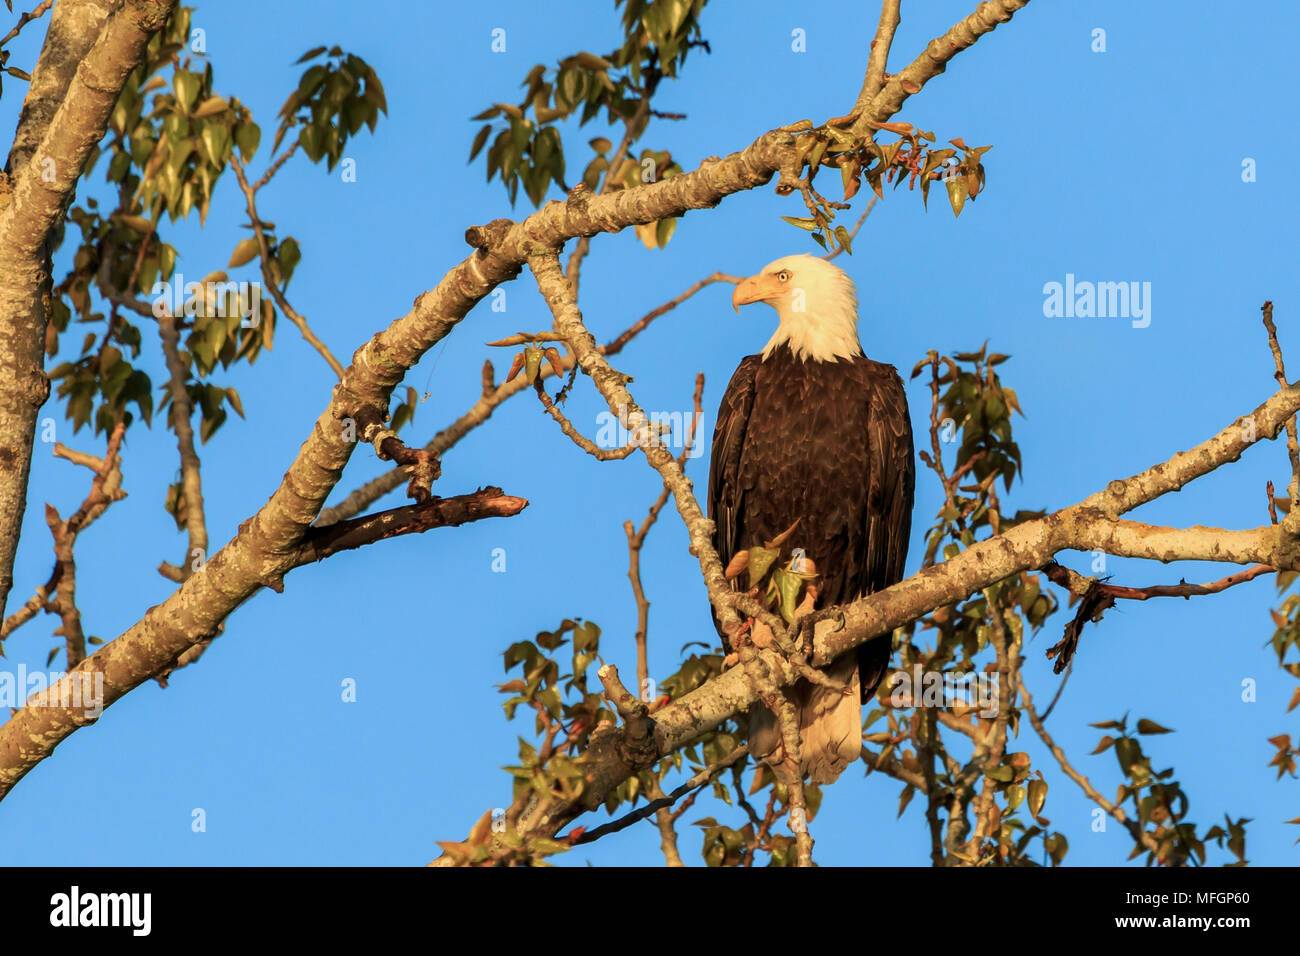 Bald Eagle perched on a tree branch lit by late evening sun Stock Photo